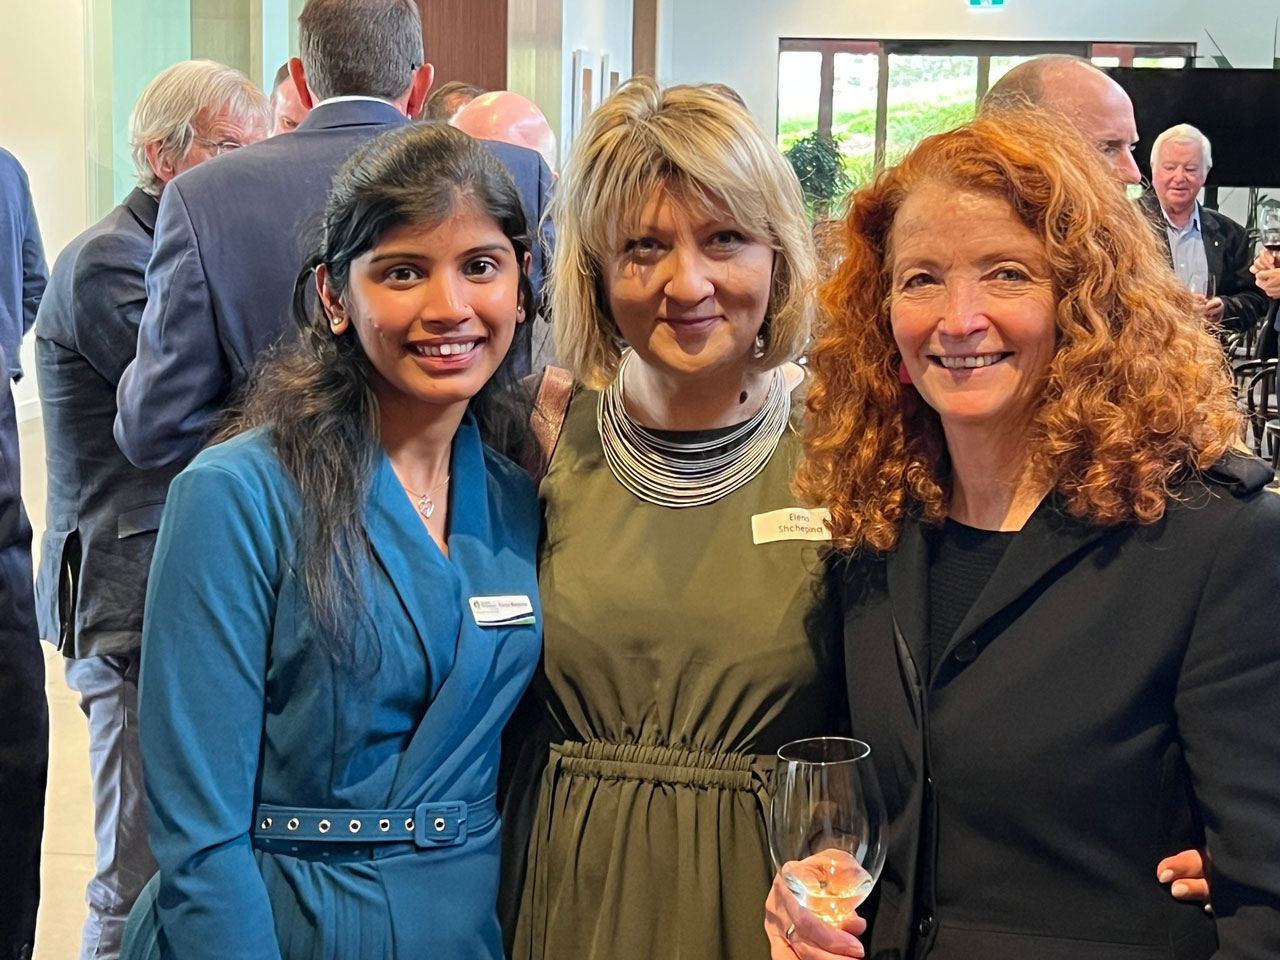 RDA BGLAP Process and Projects Manager Kavya Manjanna, Former Economic Development Officer Shchepina and our CEO Anne Moroney chat over wine at the AGM.